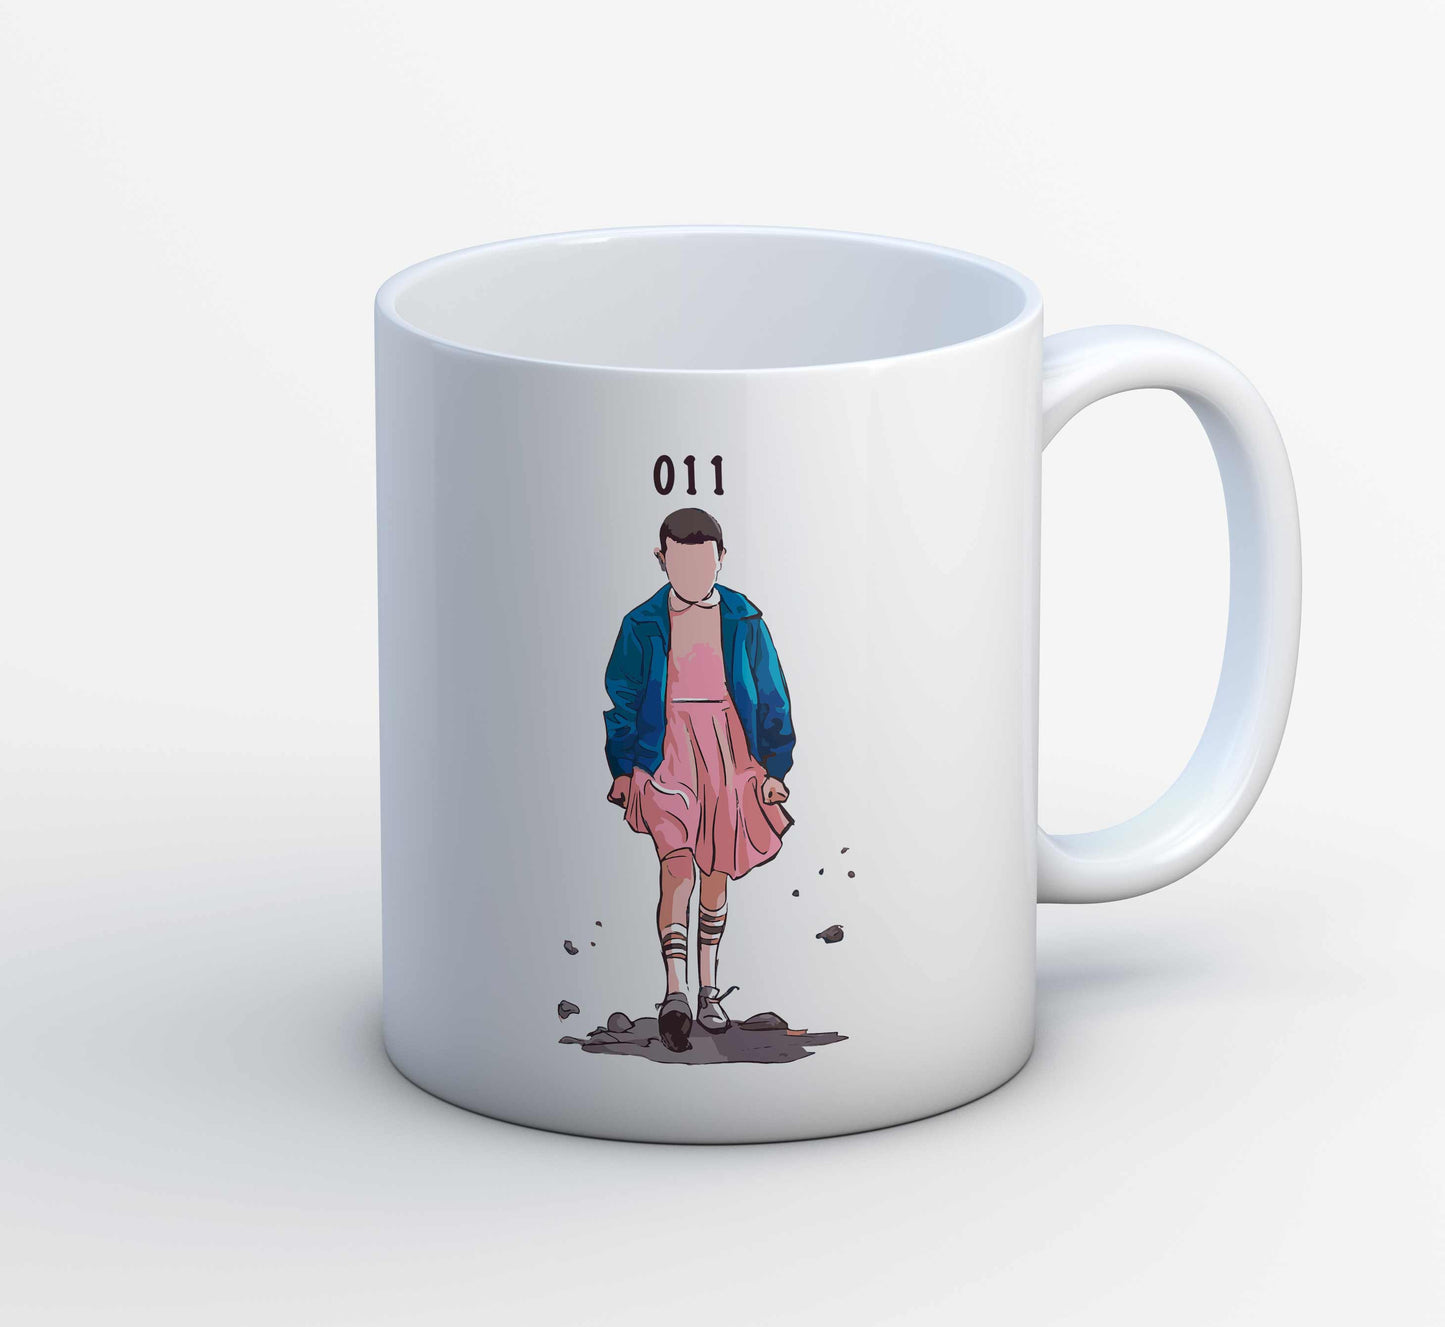 stranger things eleven mug coffee ceramic tv & movies buy online india the banyan tee tbt men women girls boys unisex  stranger things eleven demogorgon shadow monster dustin quote vector art clothing accessories merchandise